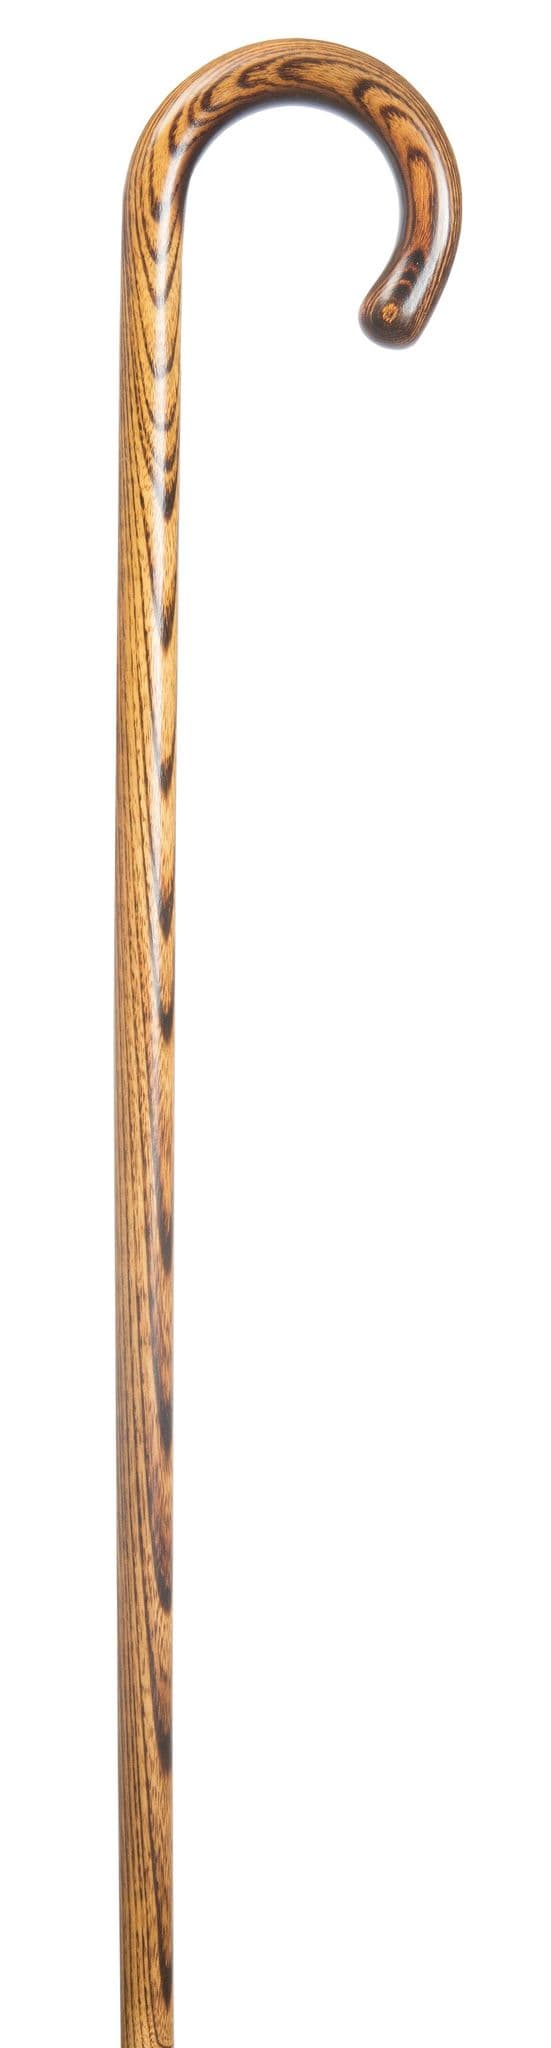 Classic Canes Acacia Crook - Scorched